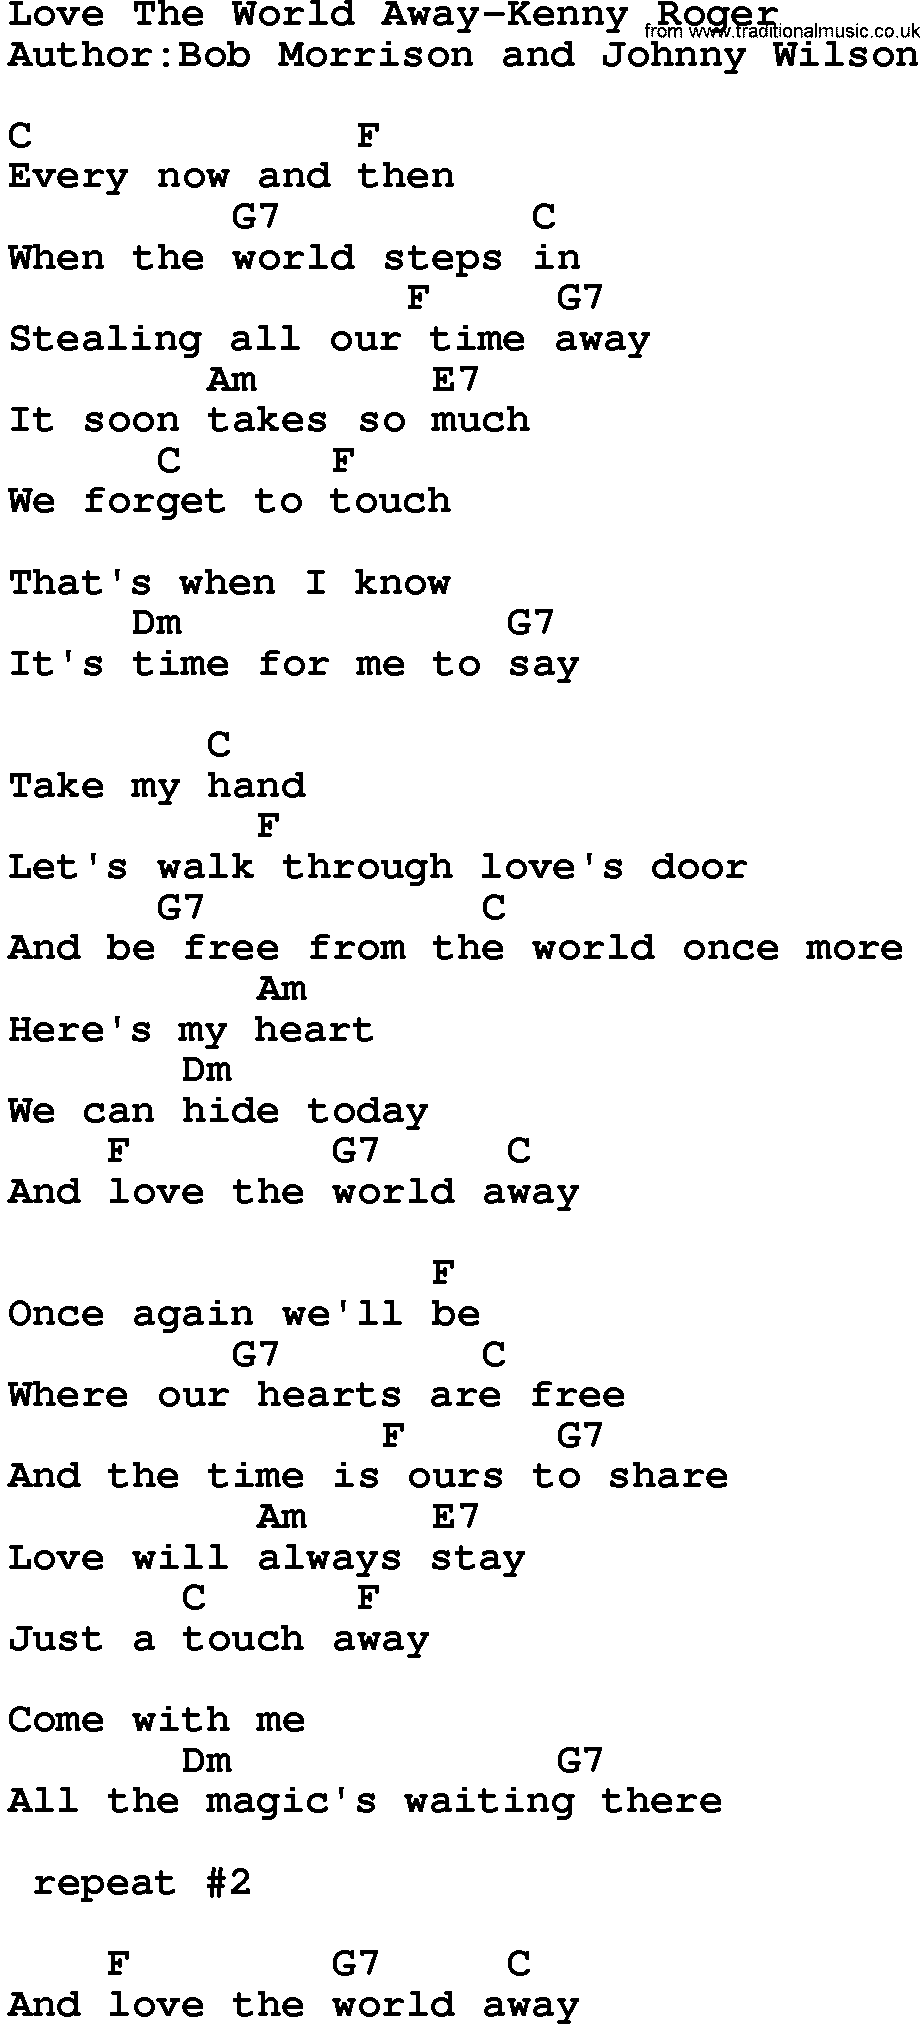 Country music song: Love The World Away-Kenny Roger lyrics and chords